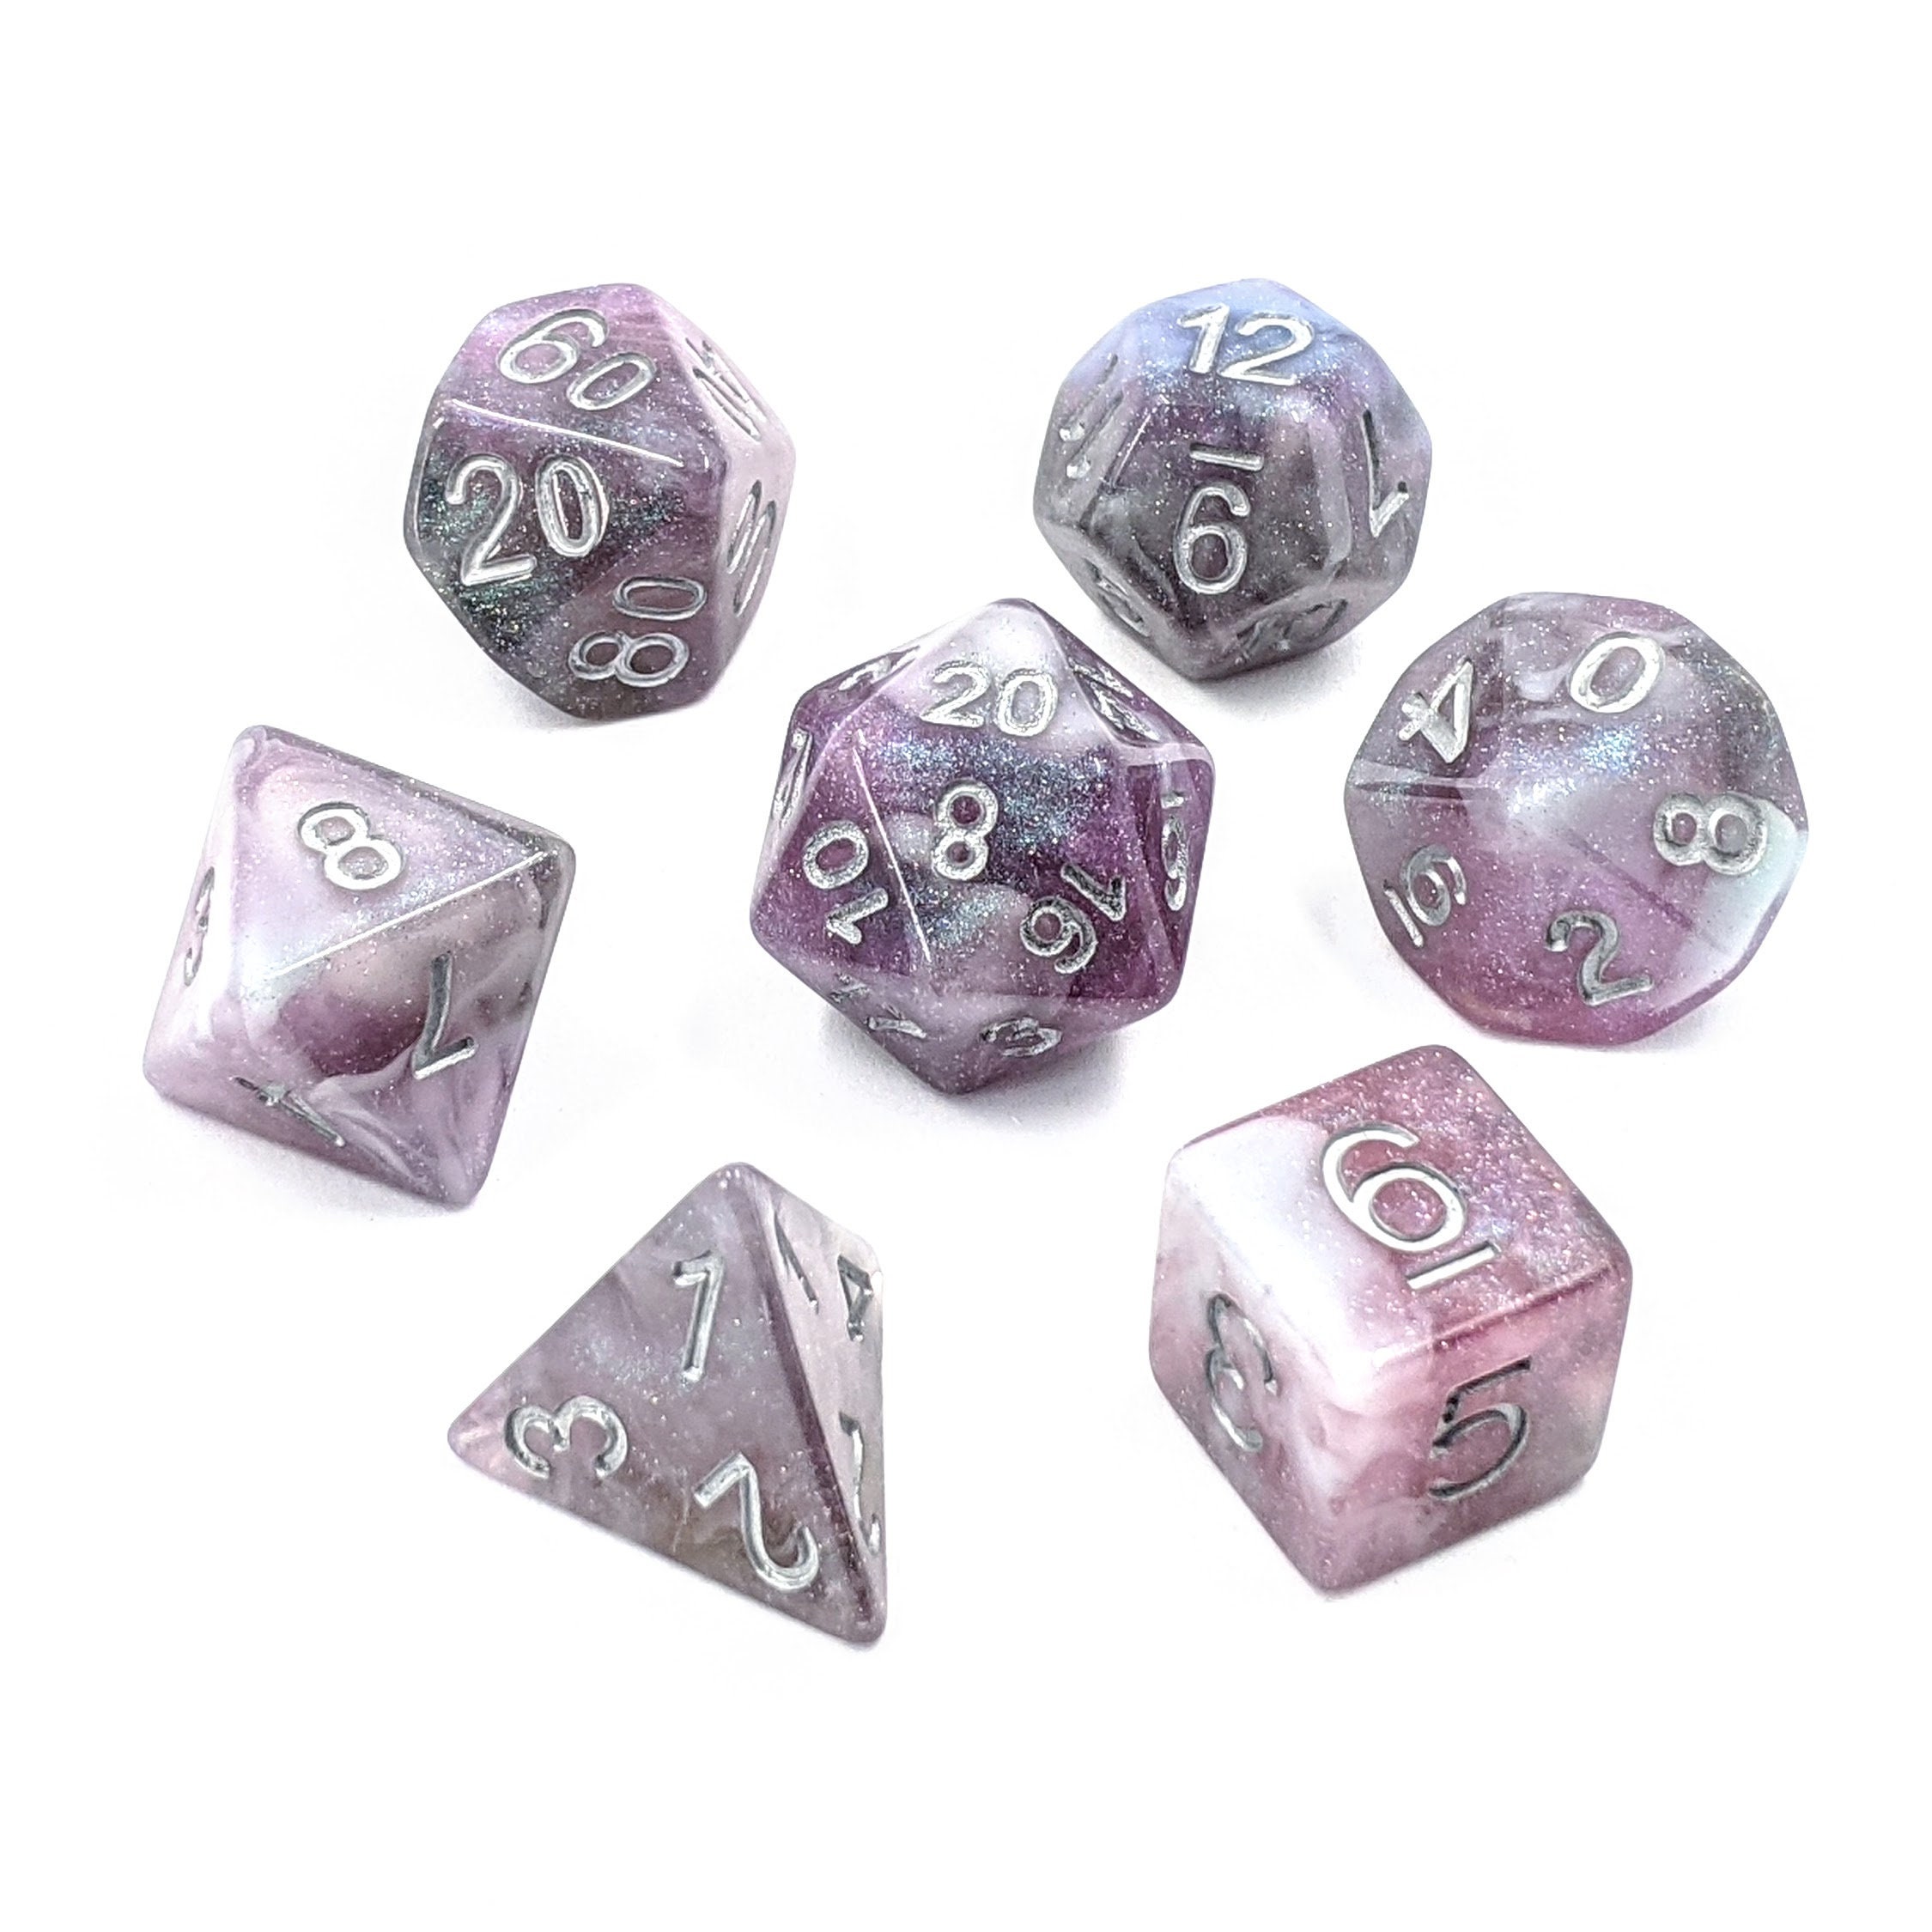 Dice Chessex Gemini Purple Steel 7-dice Set Marble Shiny D20 Gray RPG D6 26432 for sale online 